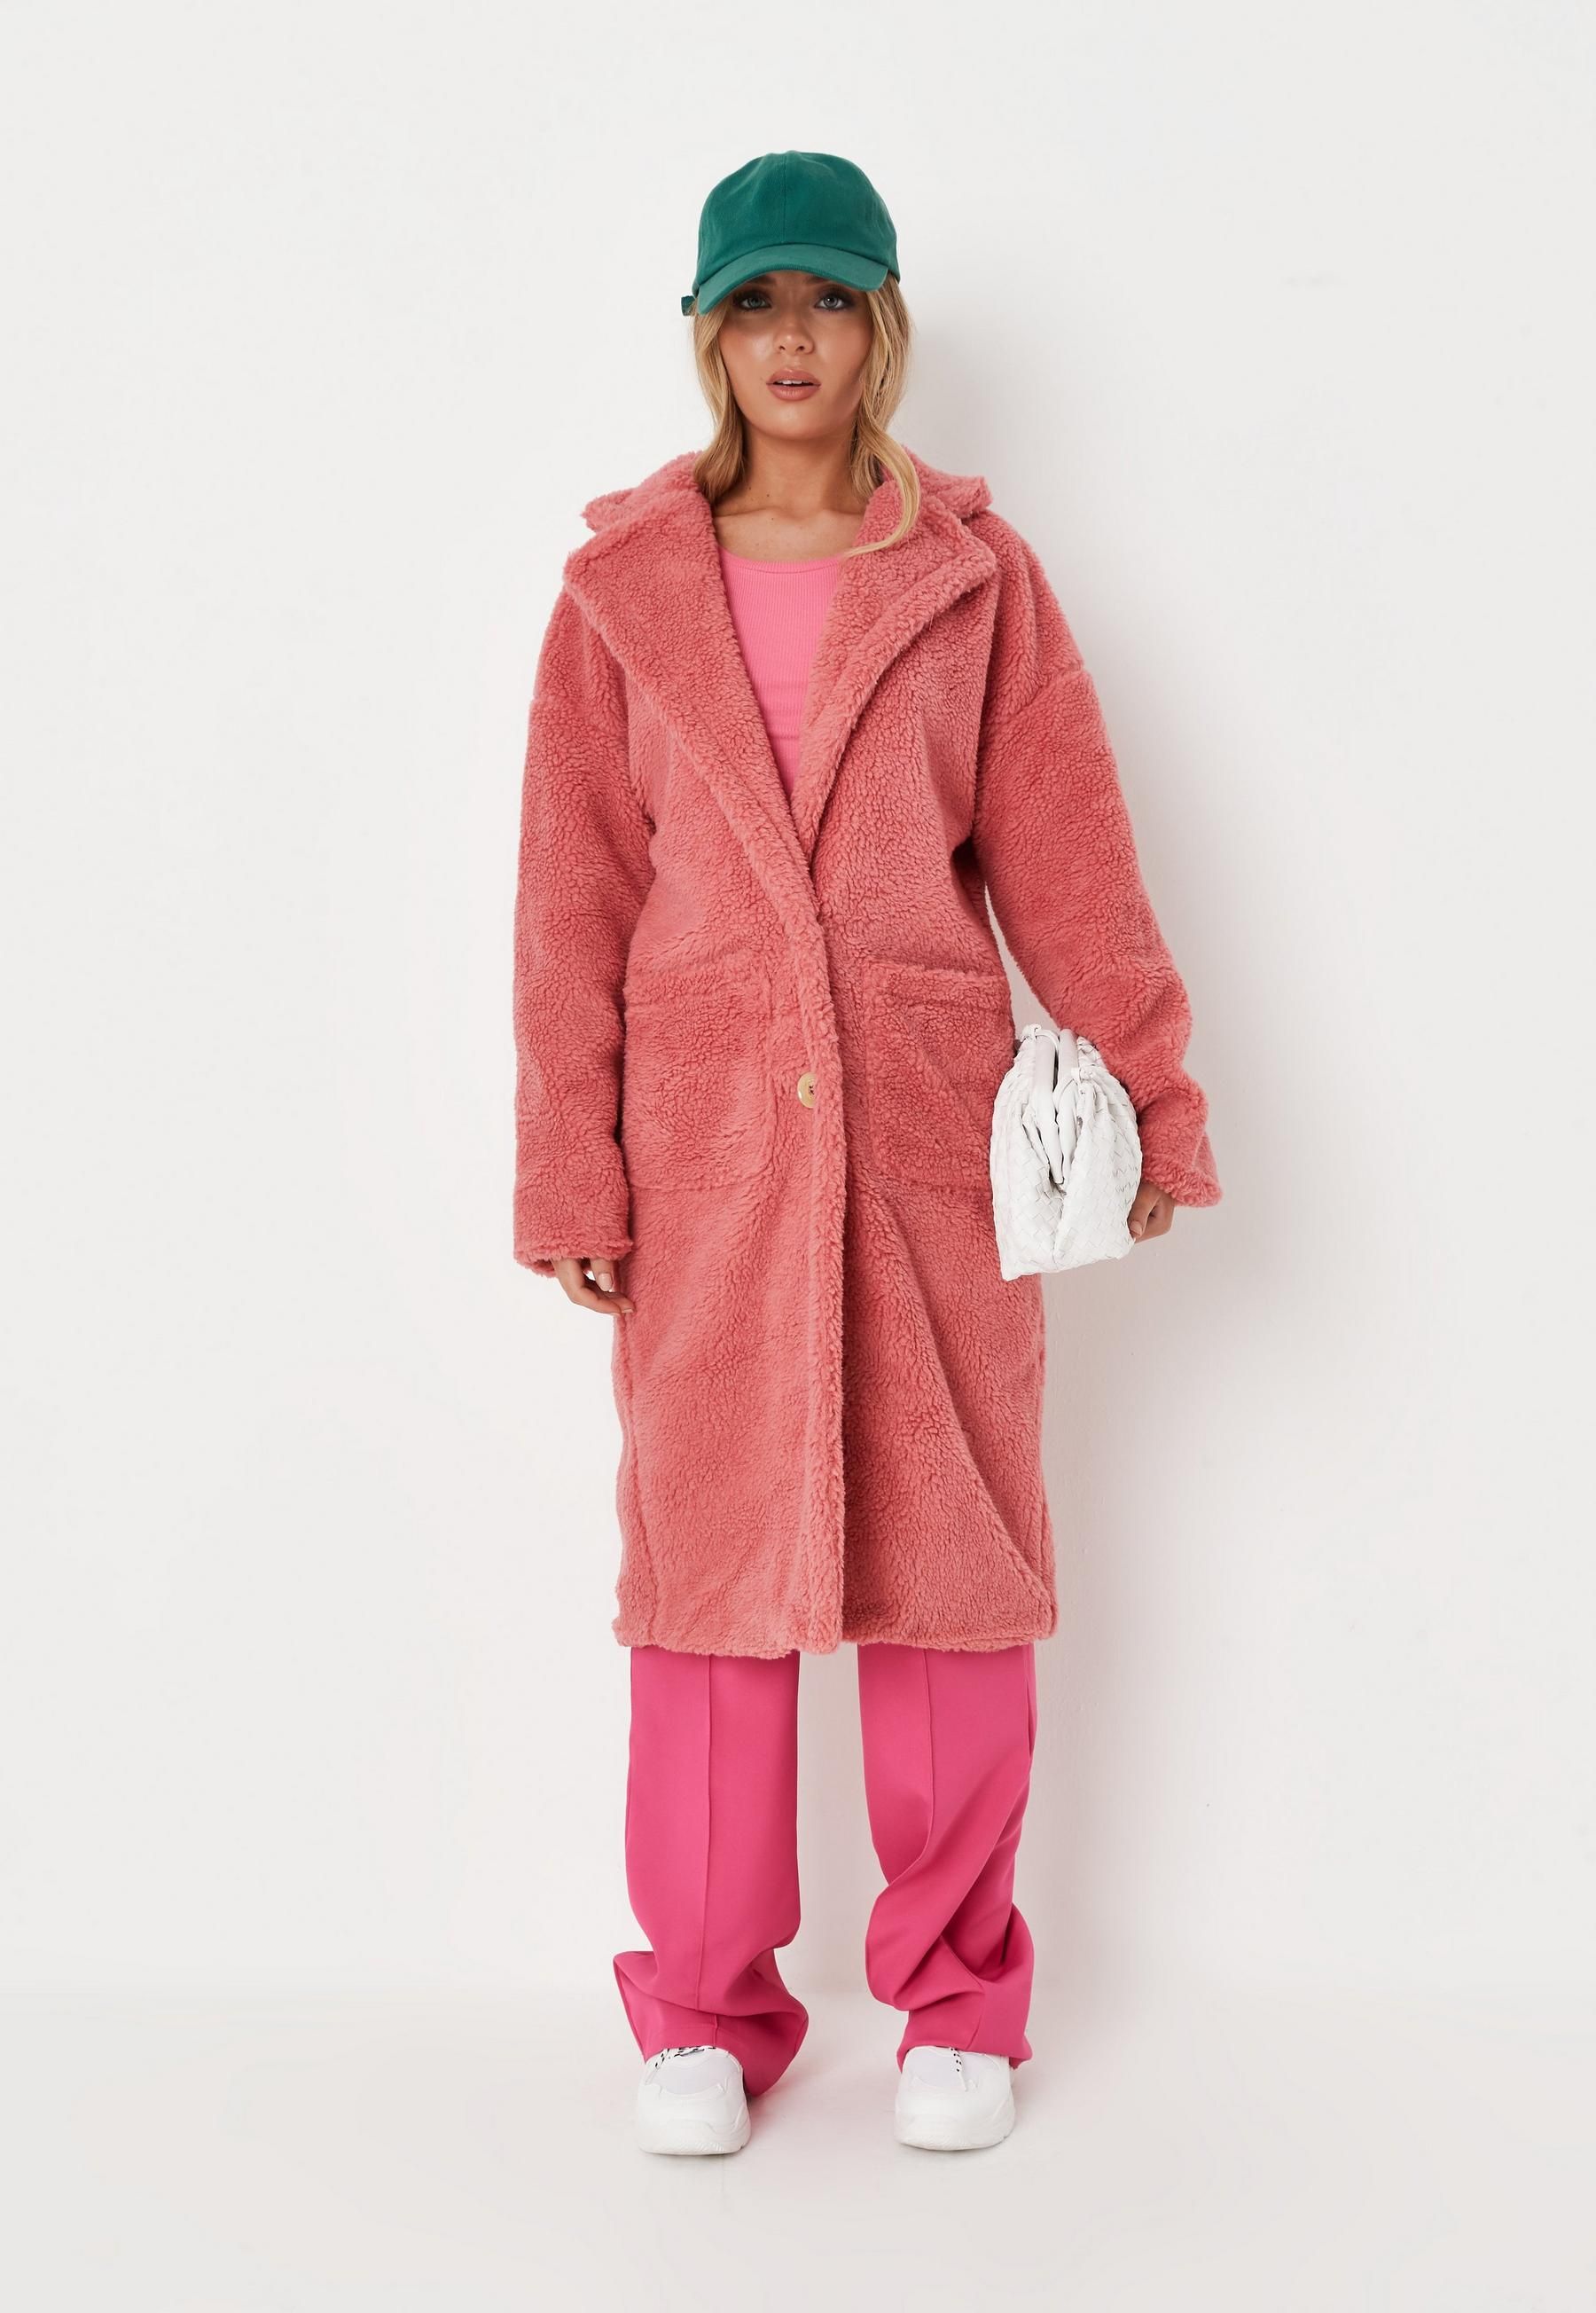 Missguided - Petite Rose Borg Teddy Patch Pocket Coat | Missguided (US & CA)